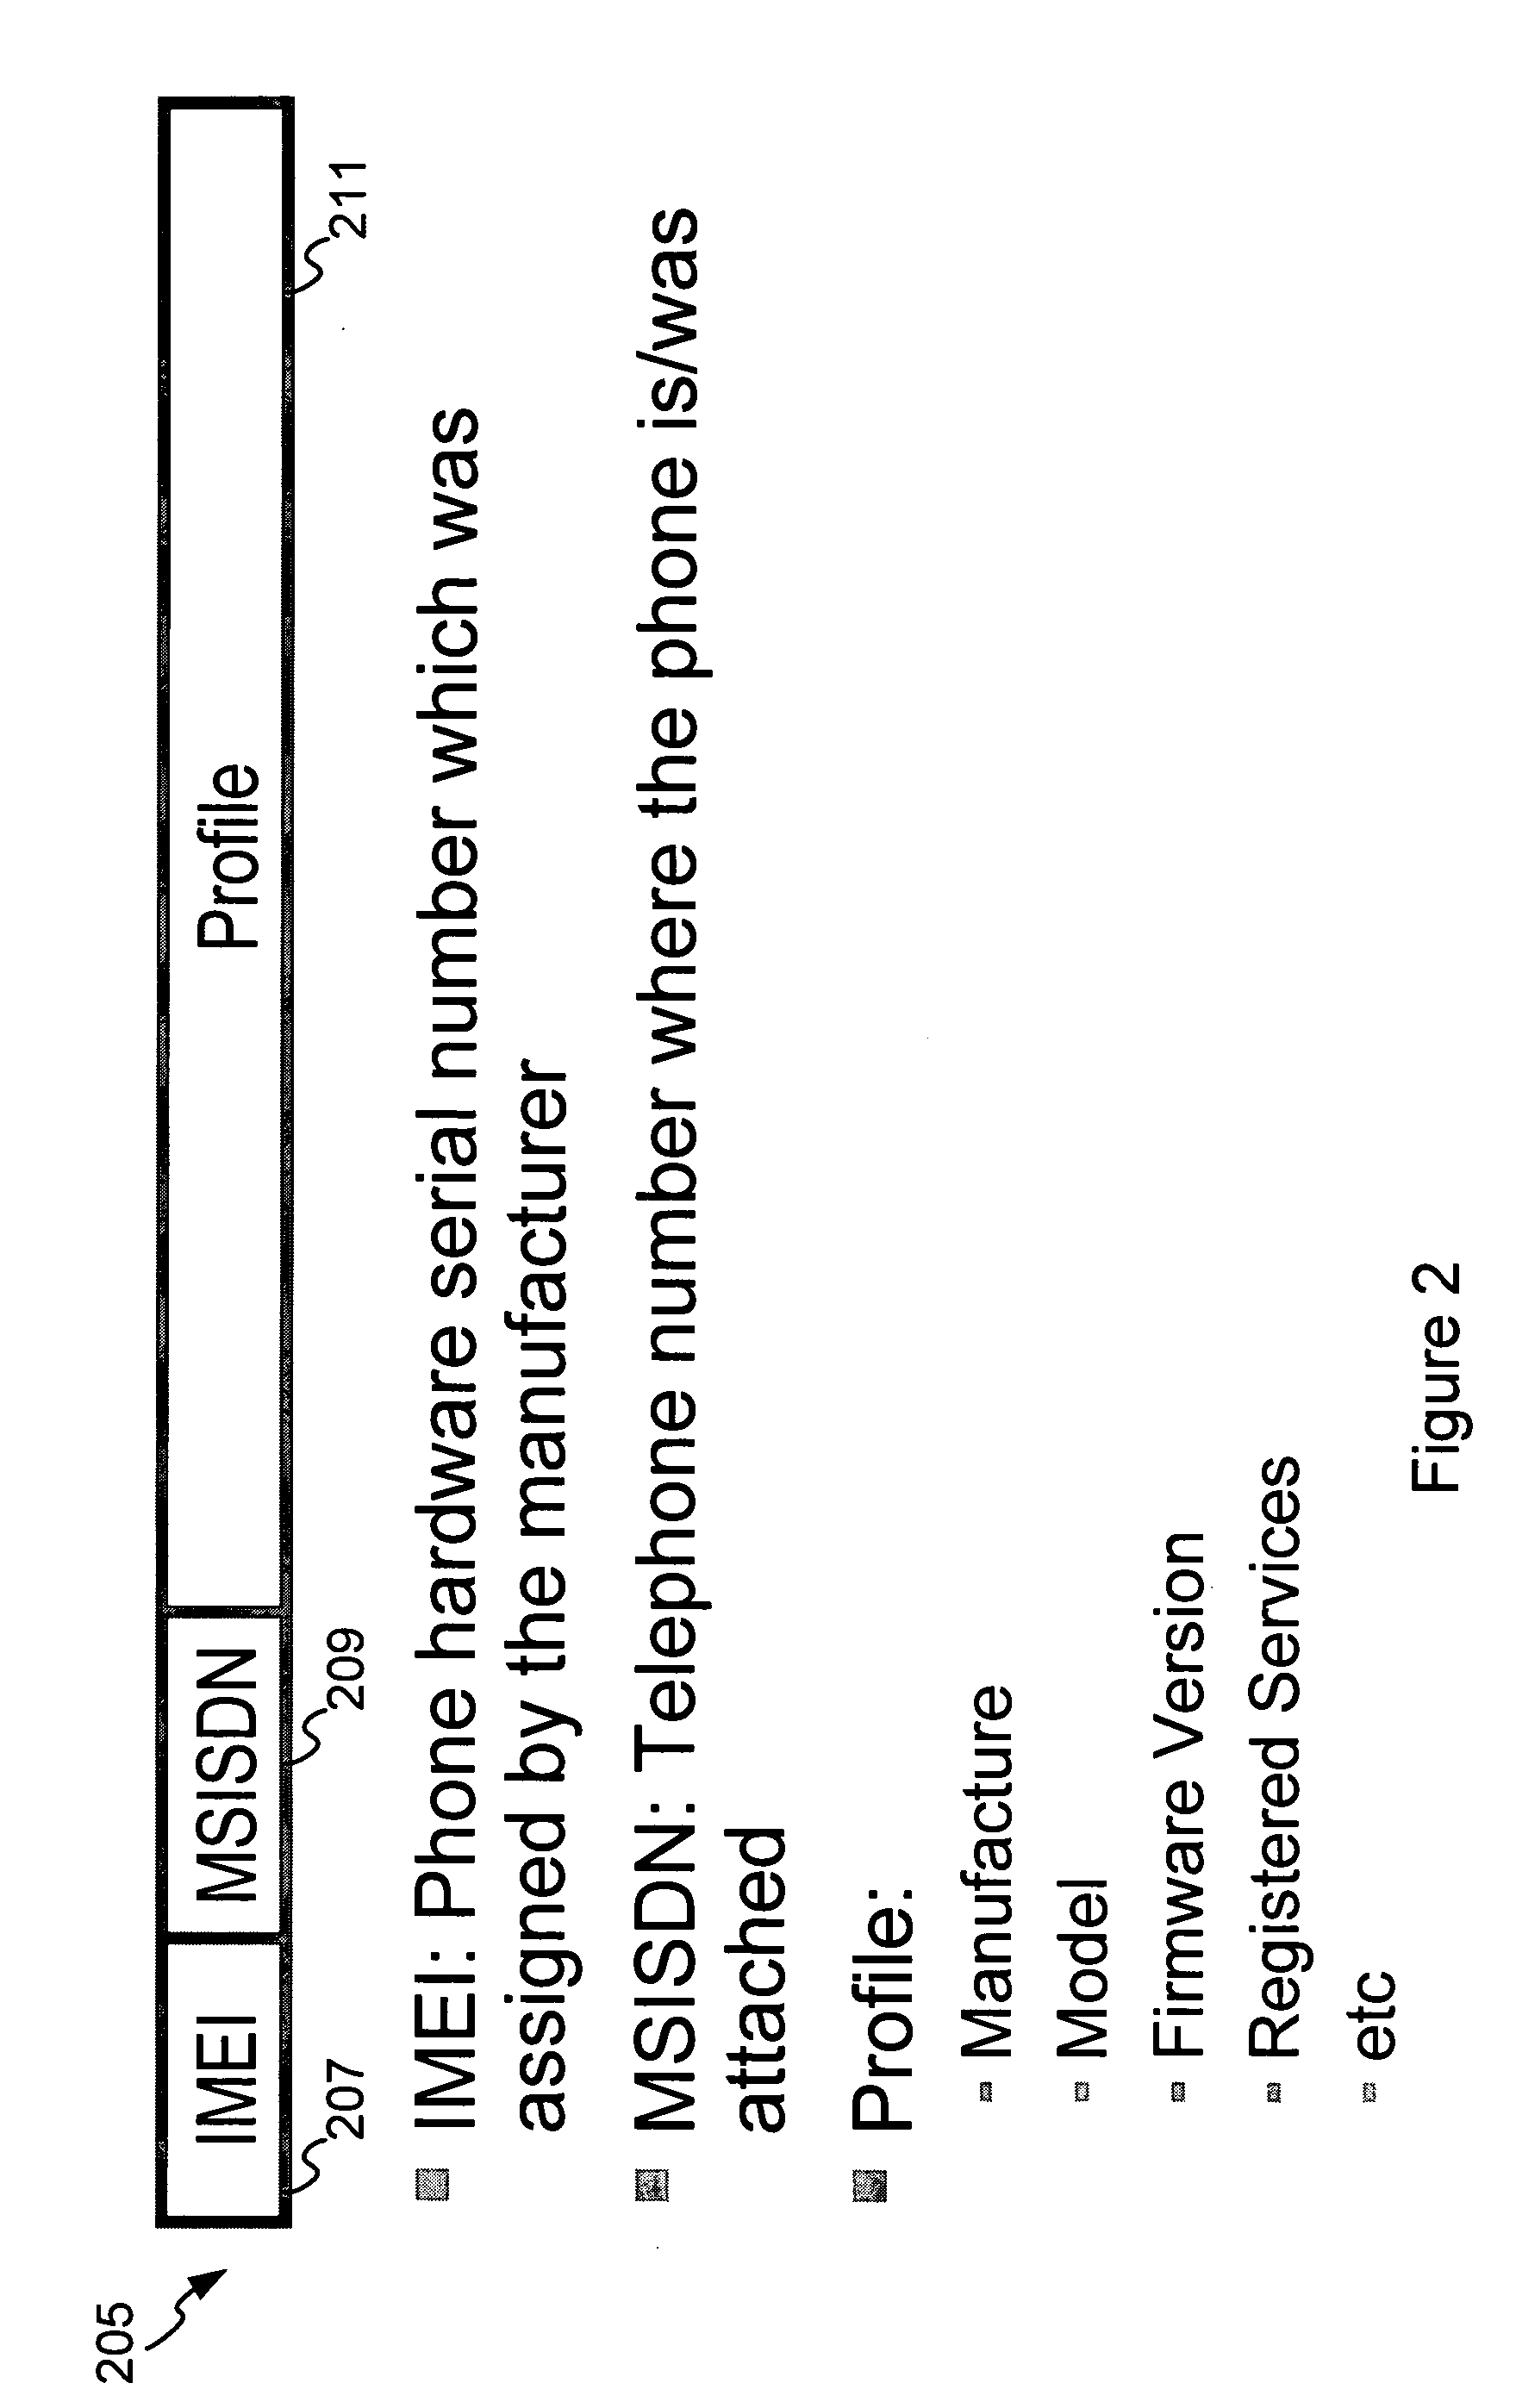 Network and method for registration of mobile devices and management of the mobile devices